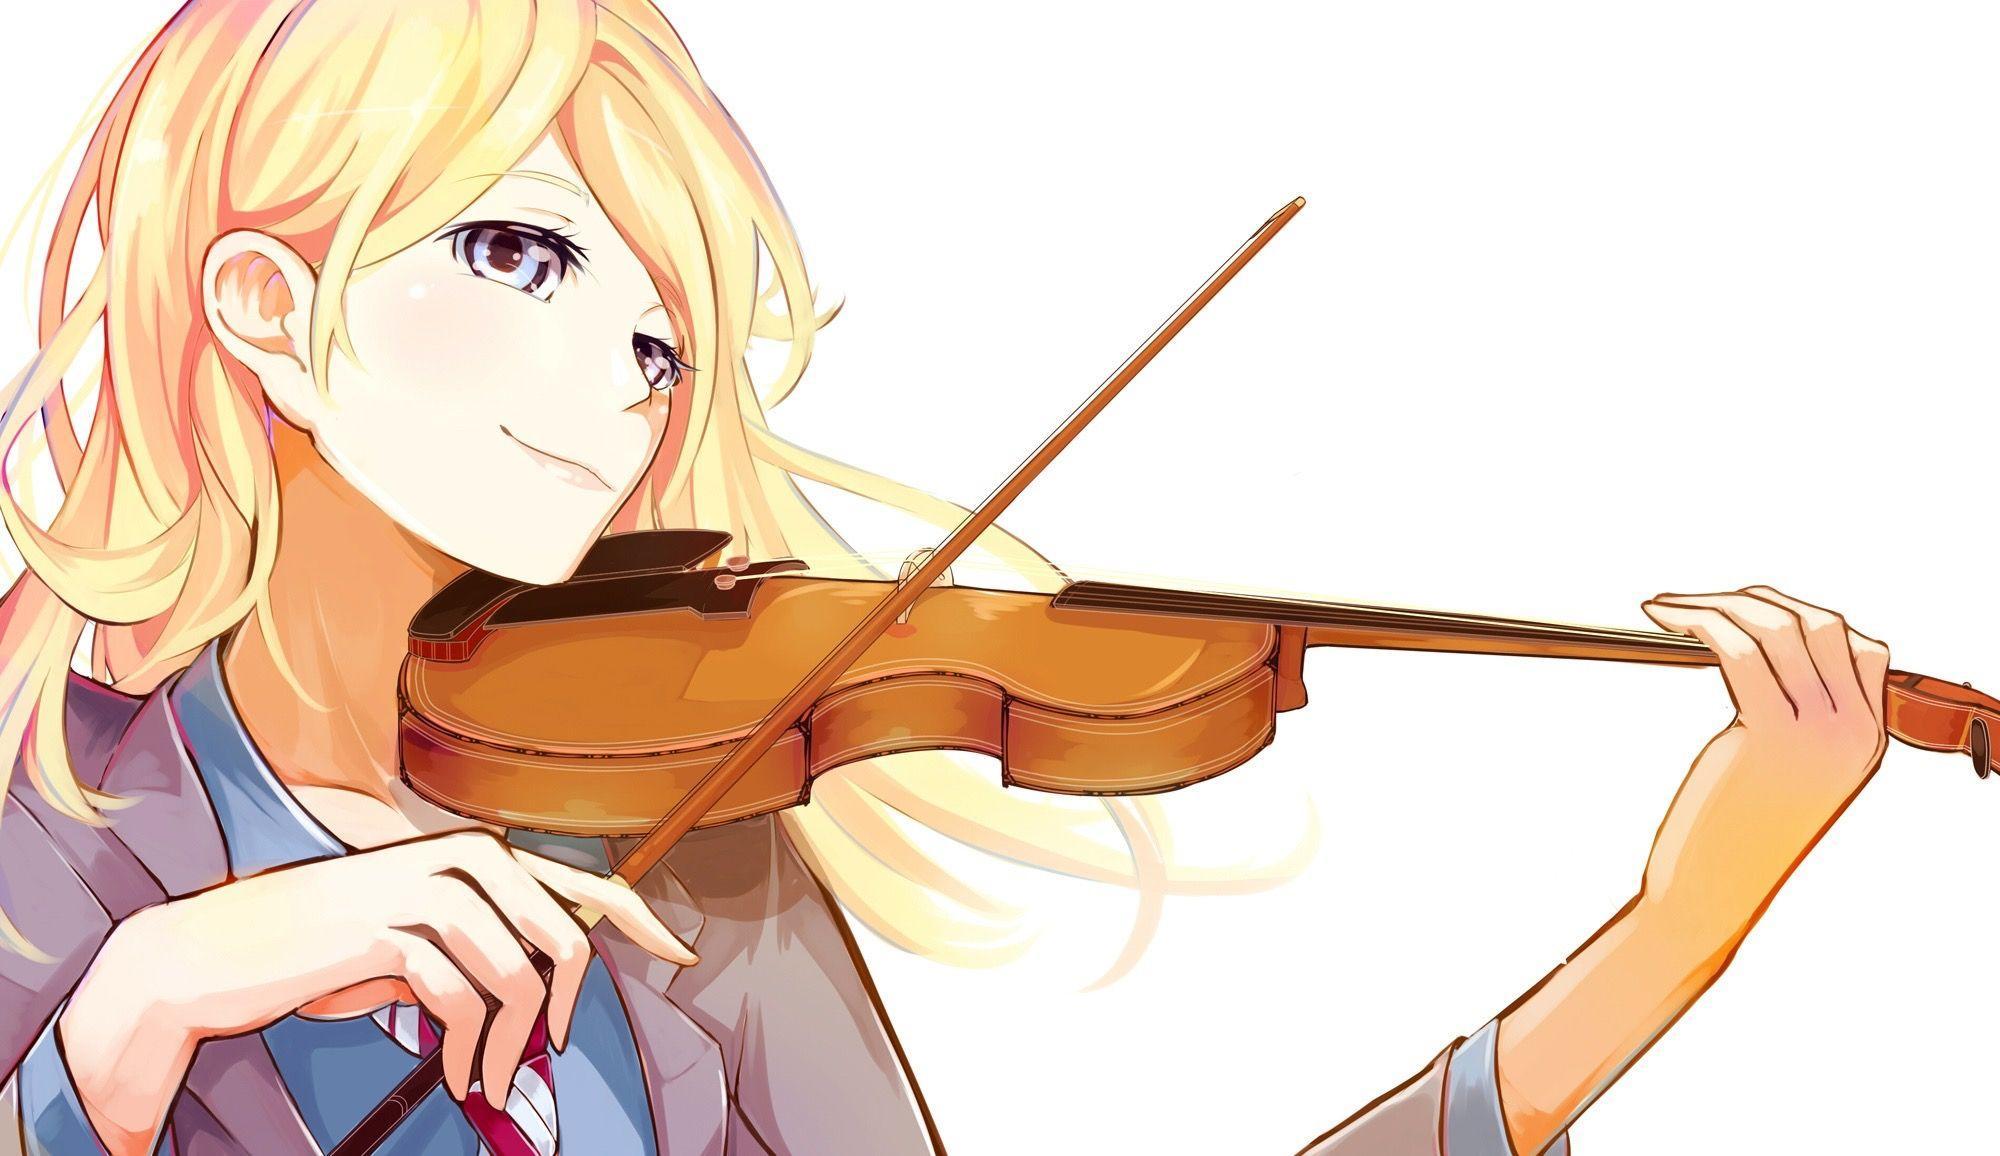 Your Lie In April Full Hd Wallpaper 4k, Your Lie In April, Anime